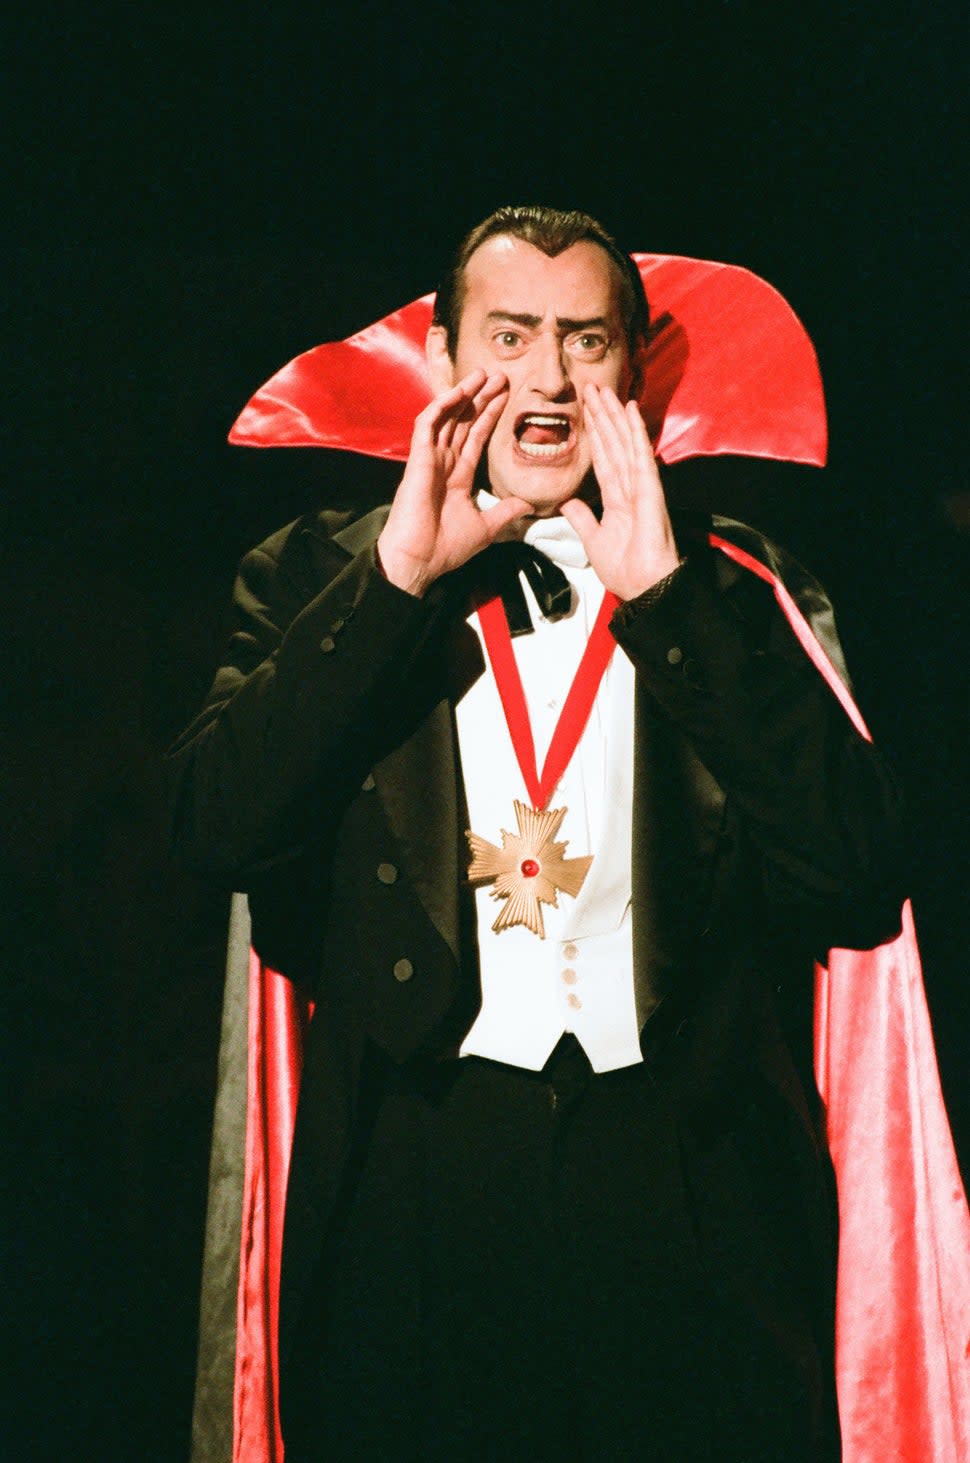 THE TONIGHT SHOW WITH JAY LENO -- Episode 793 -- Pictured: Actor Joe Flaherty as Dracula during the 